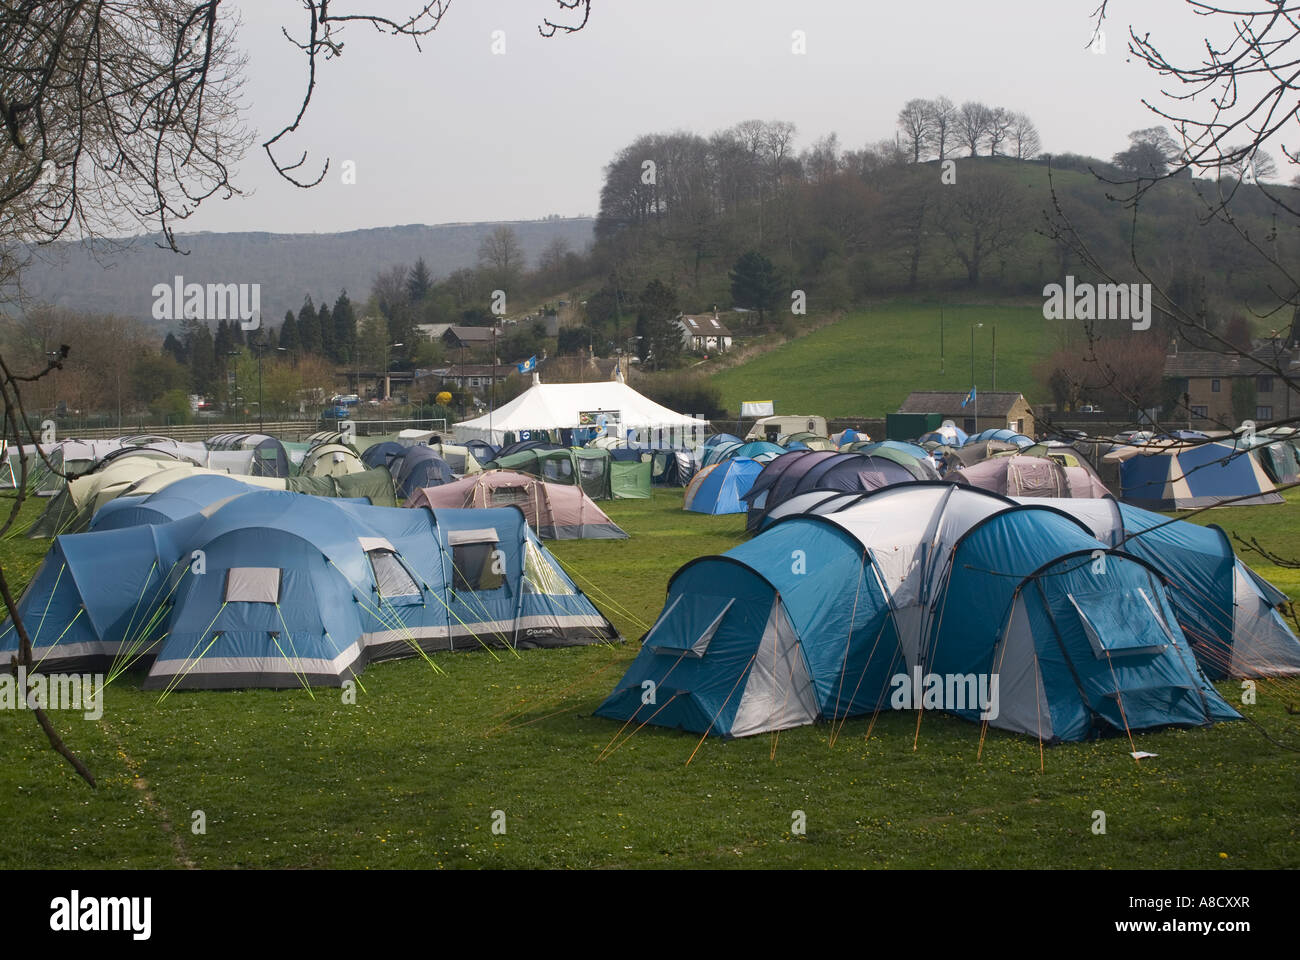 Camping exhibition held in a field near Stoney Middleton Derbyshire UK in April 2007 Stock Photo